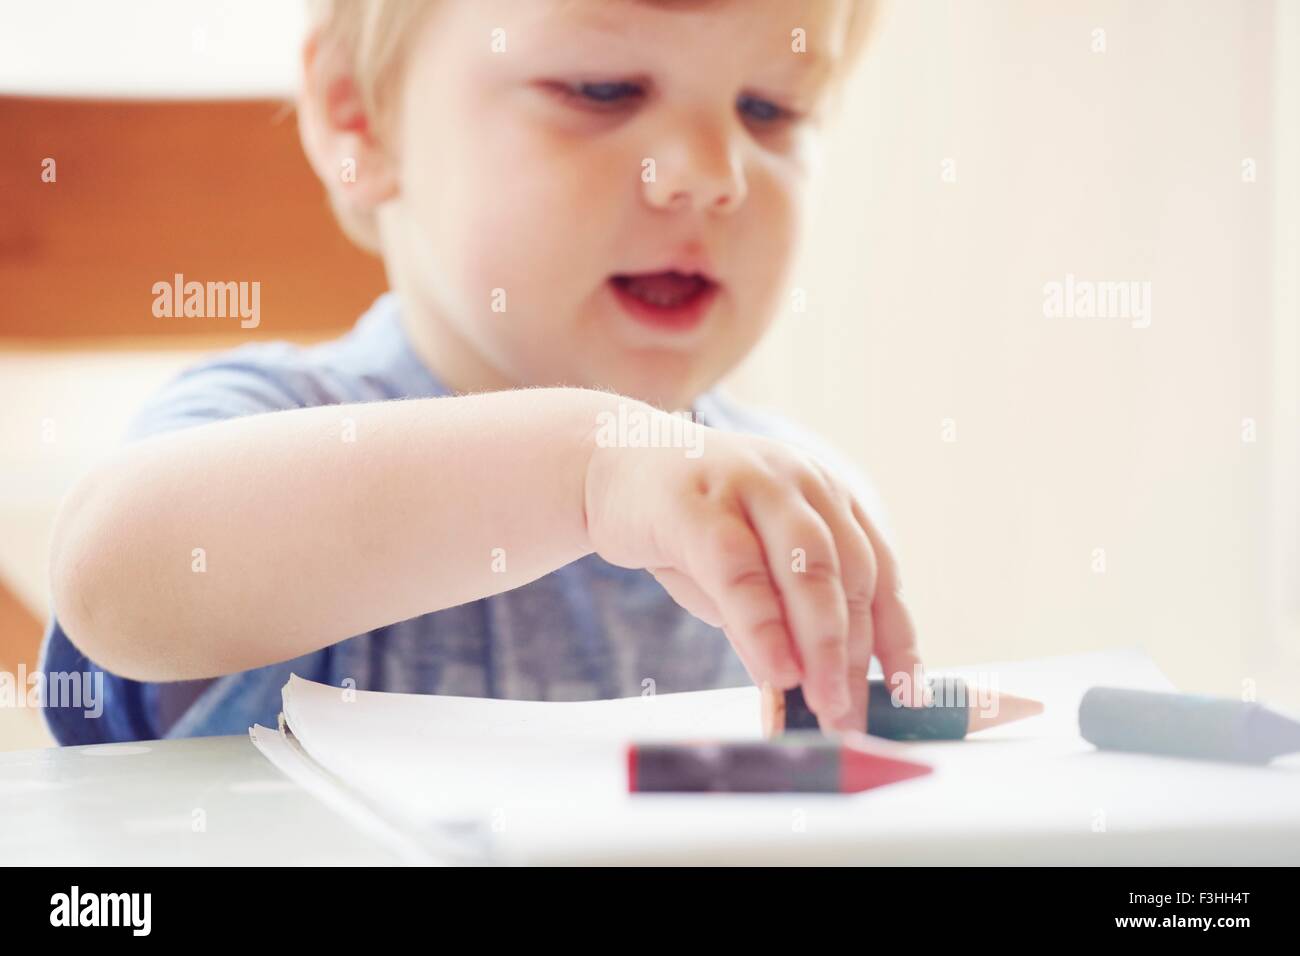 Boy sitting at table touching crayon, focus on foreground Stock Photo